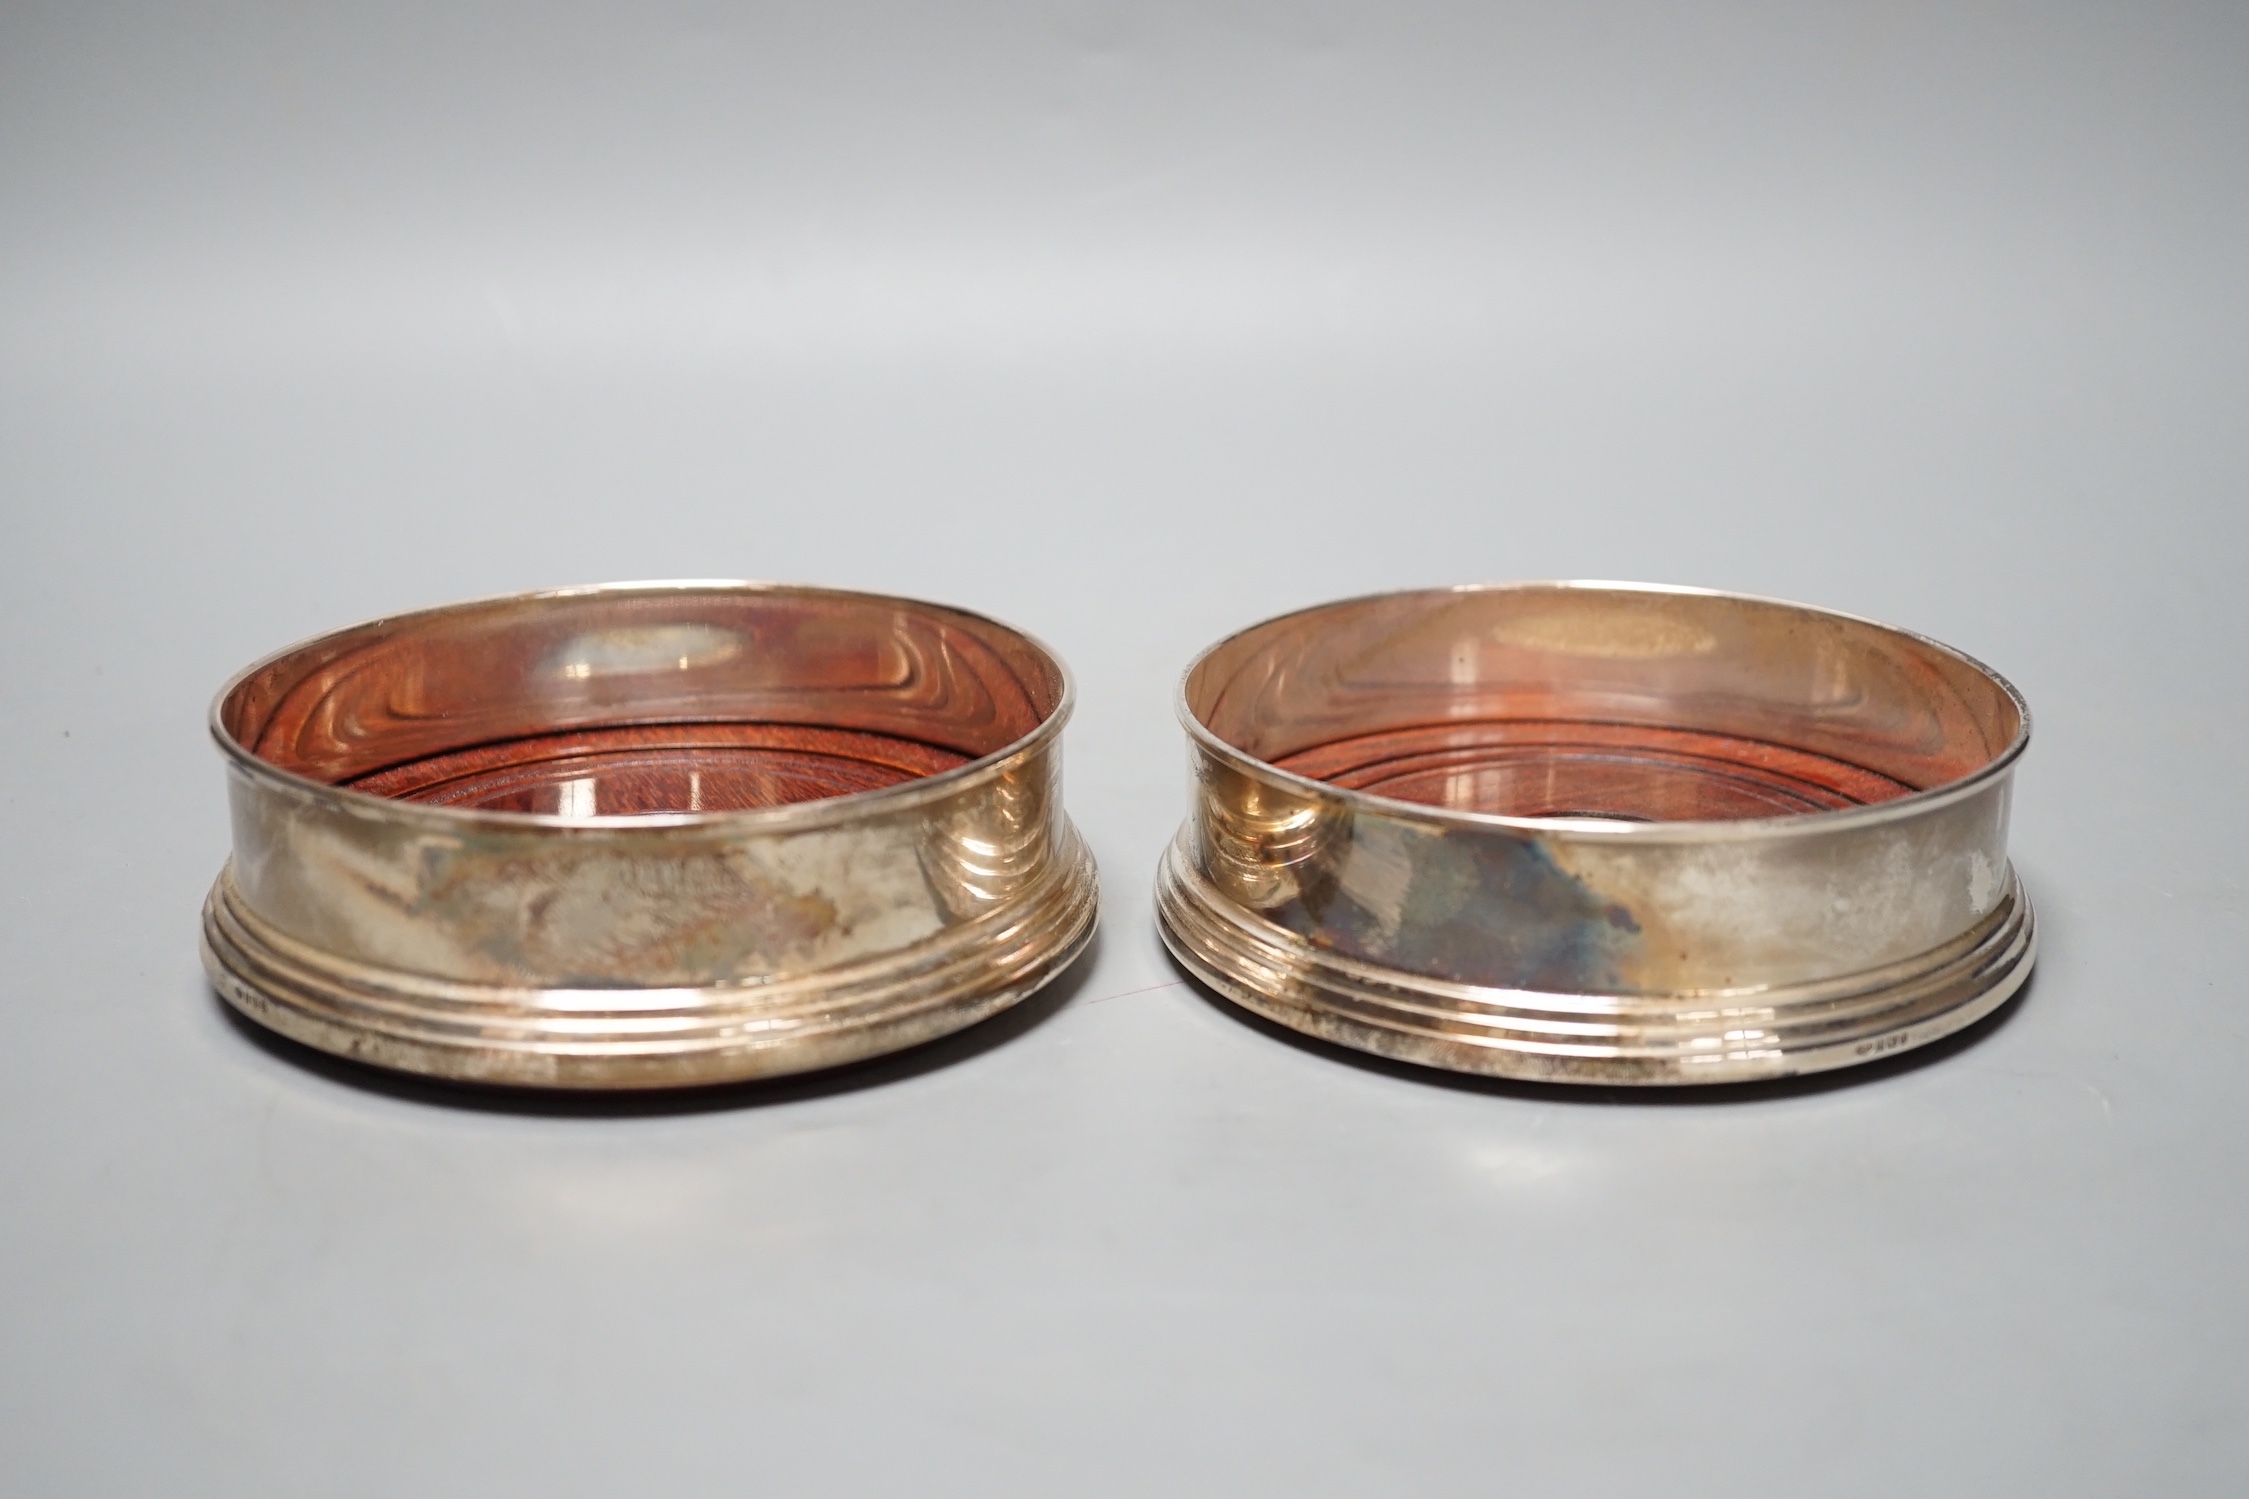 A pair of modern silver mounted wine coasters, B & Co, London,1996, diameter 11.9cm.